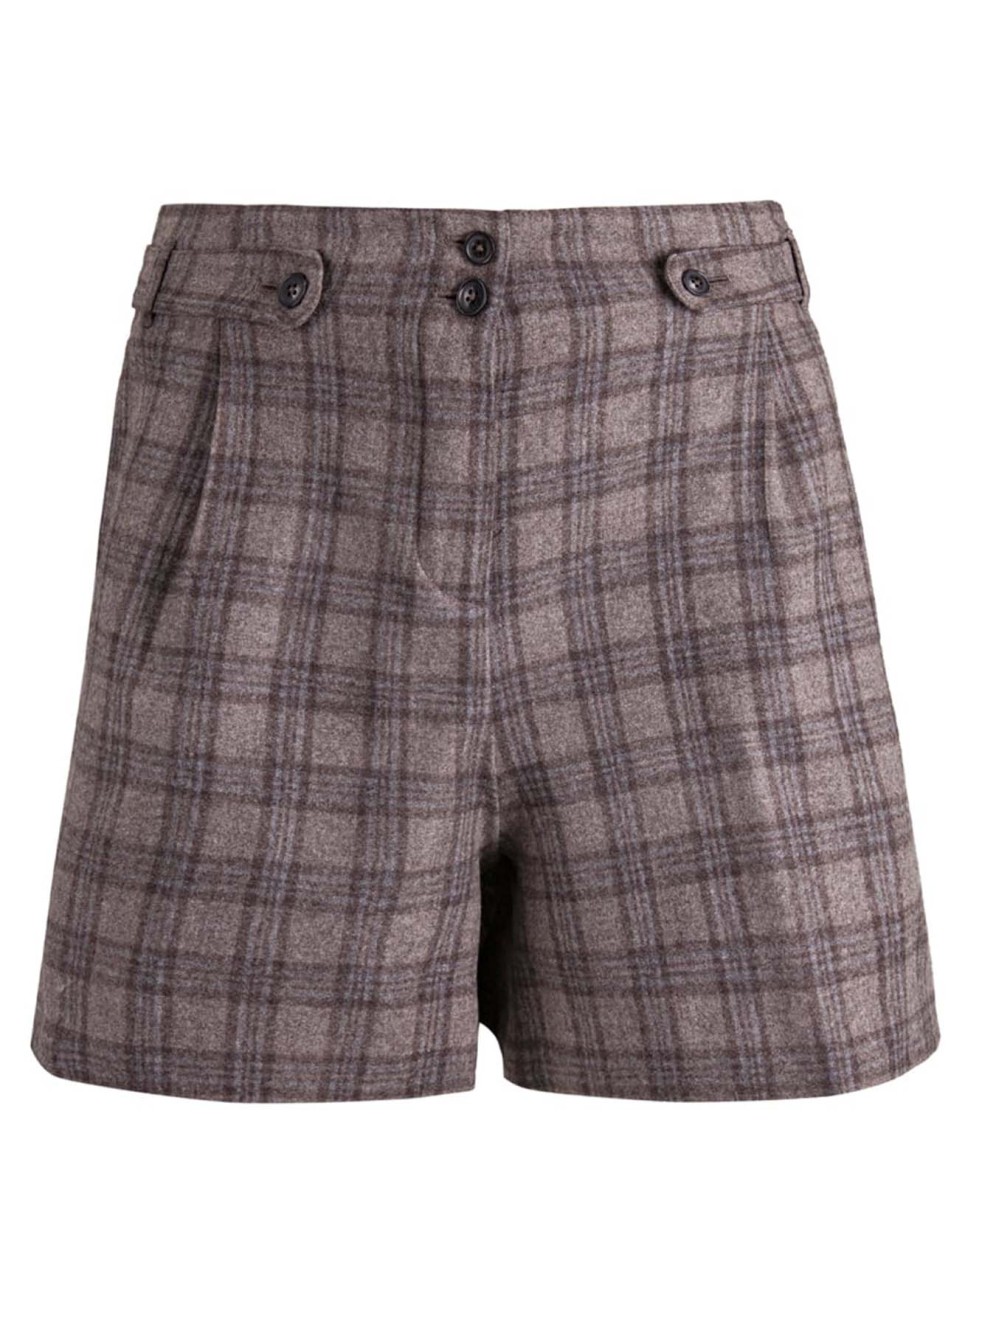 Dionne Shorts | Lambswool Check, Grey